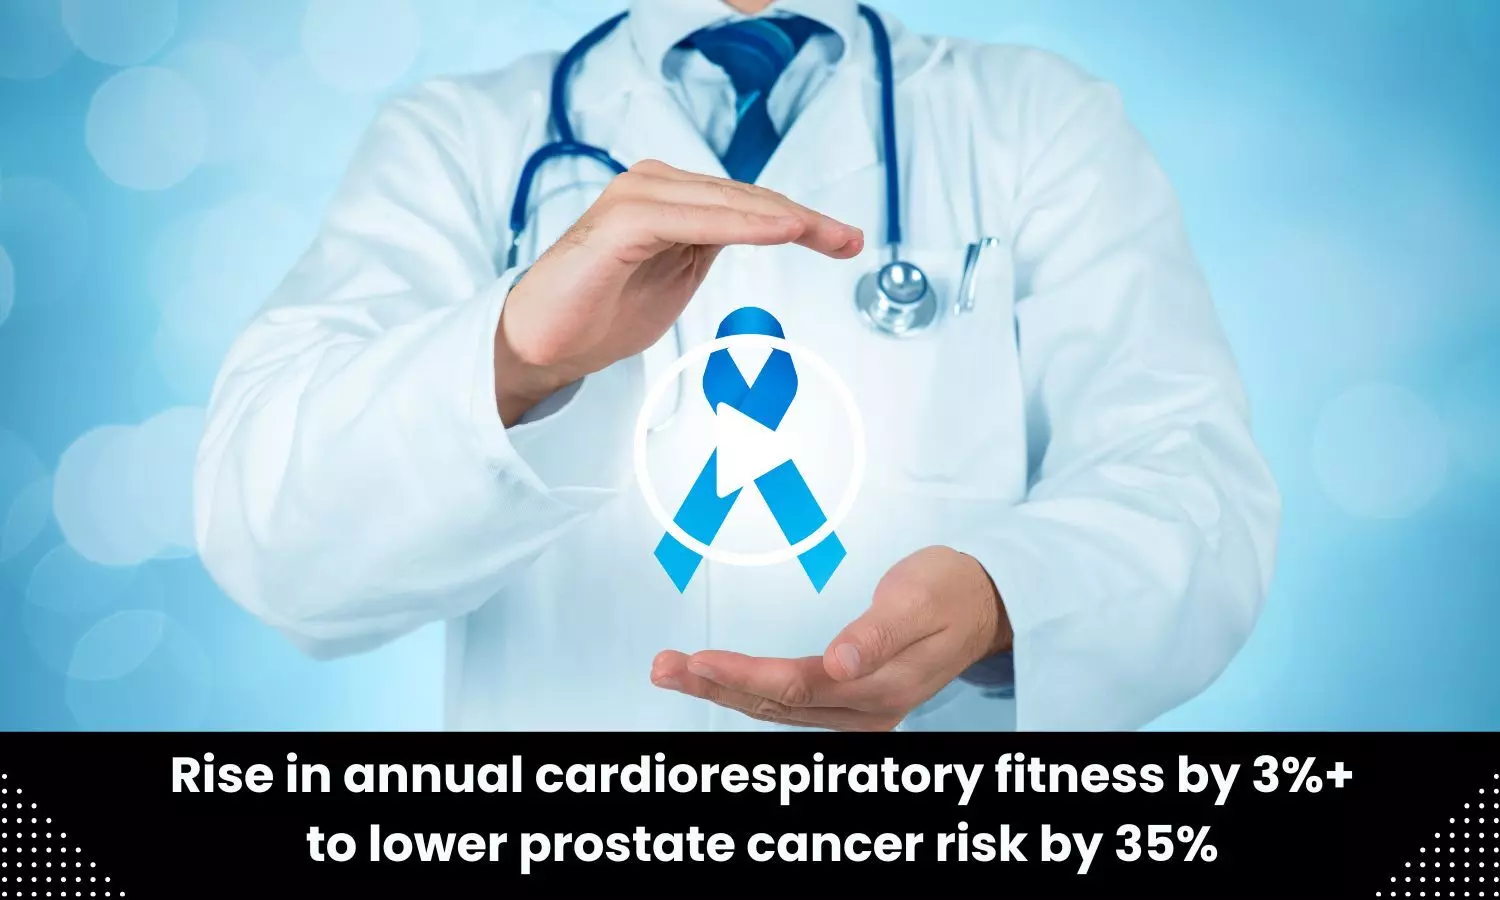 Rise in annual cardiorespiratory fitness by 3%+ to lower prostate cancer risk by 35%